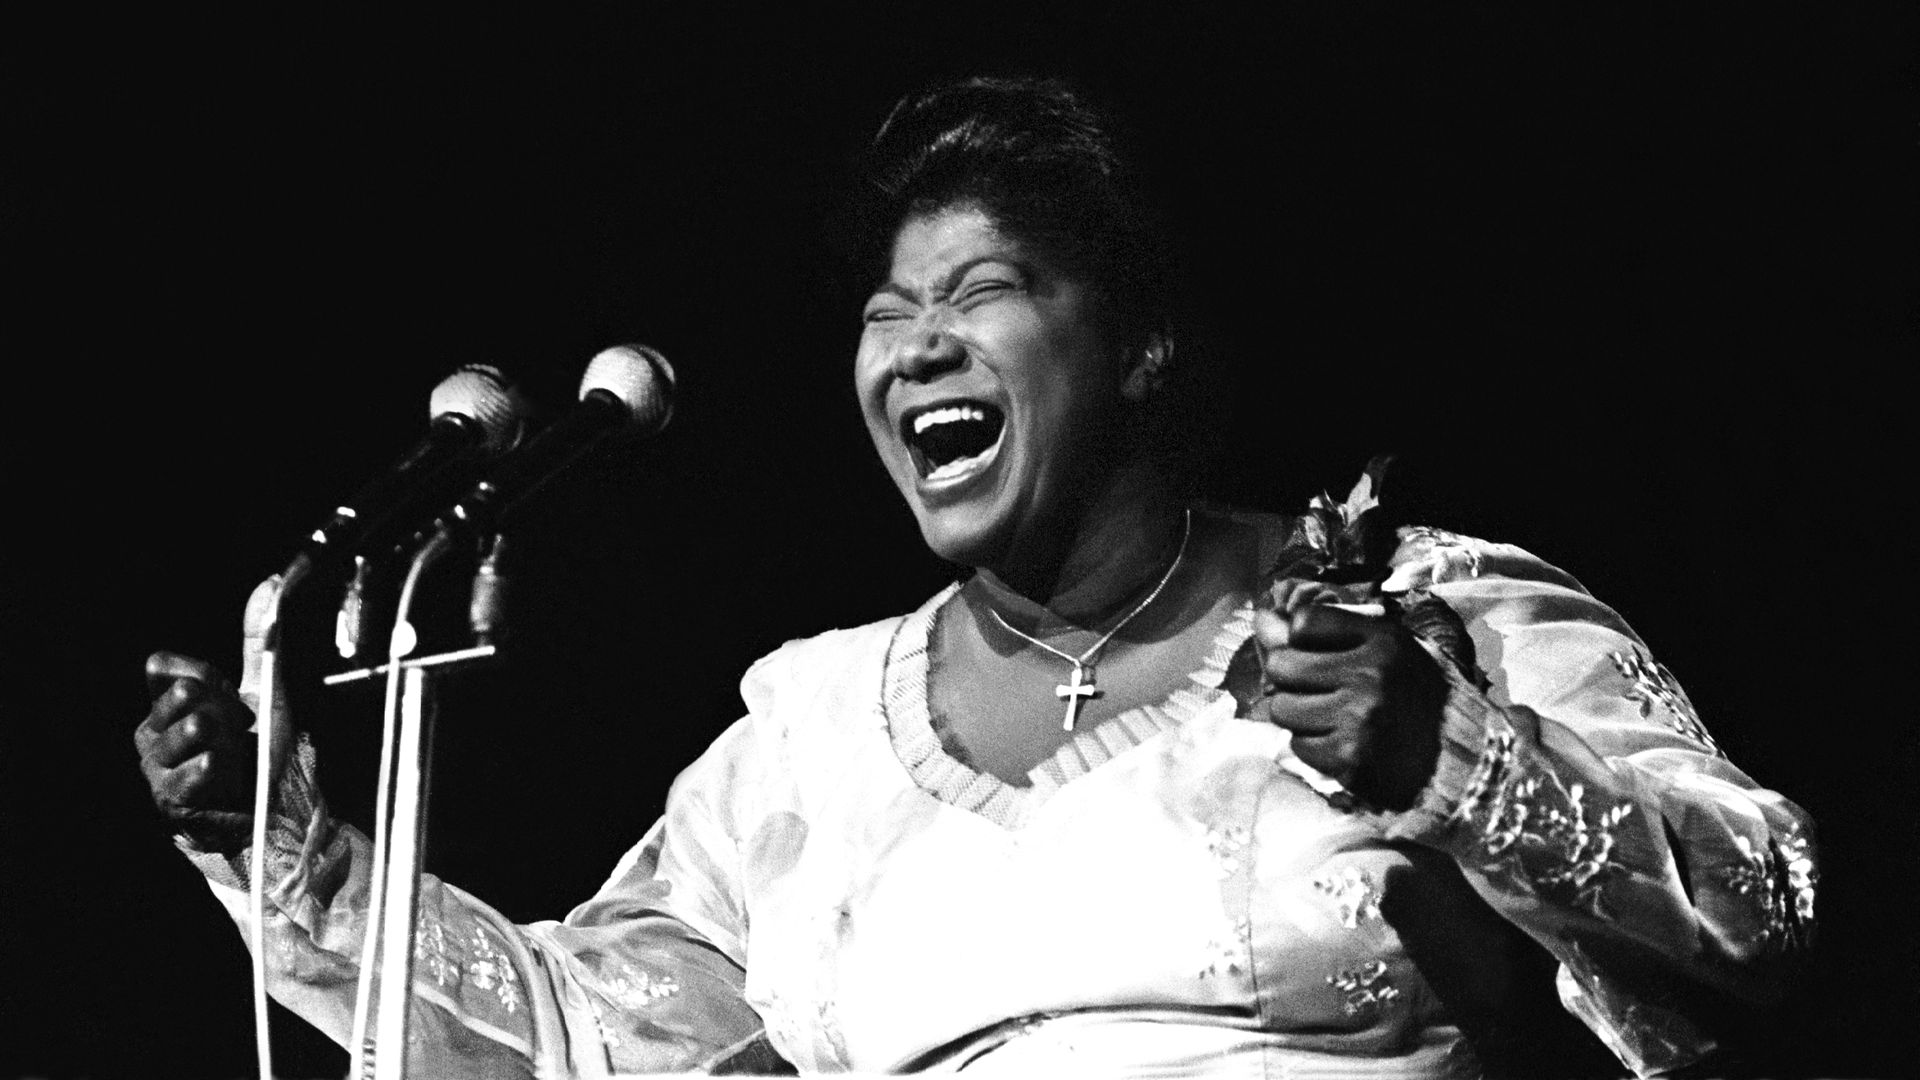 Photo shows Mahalia Jackson singing on stage in a black and white photo